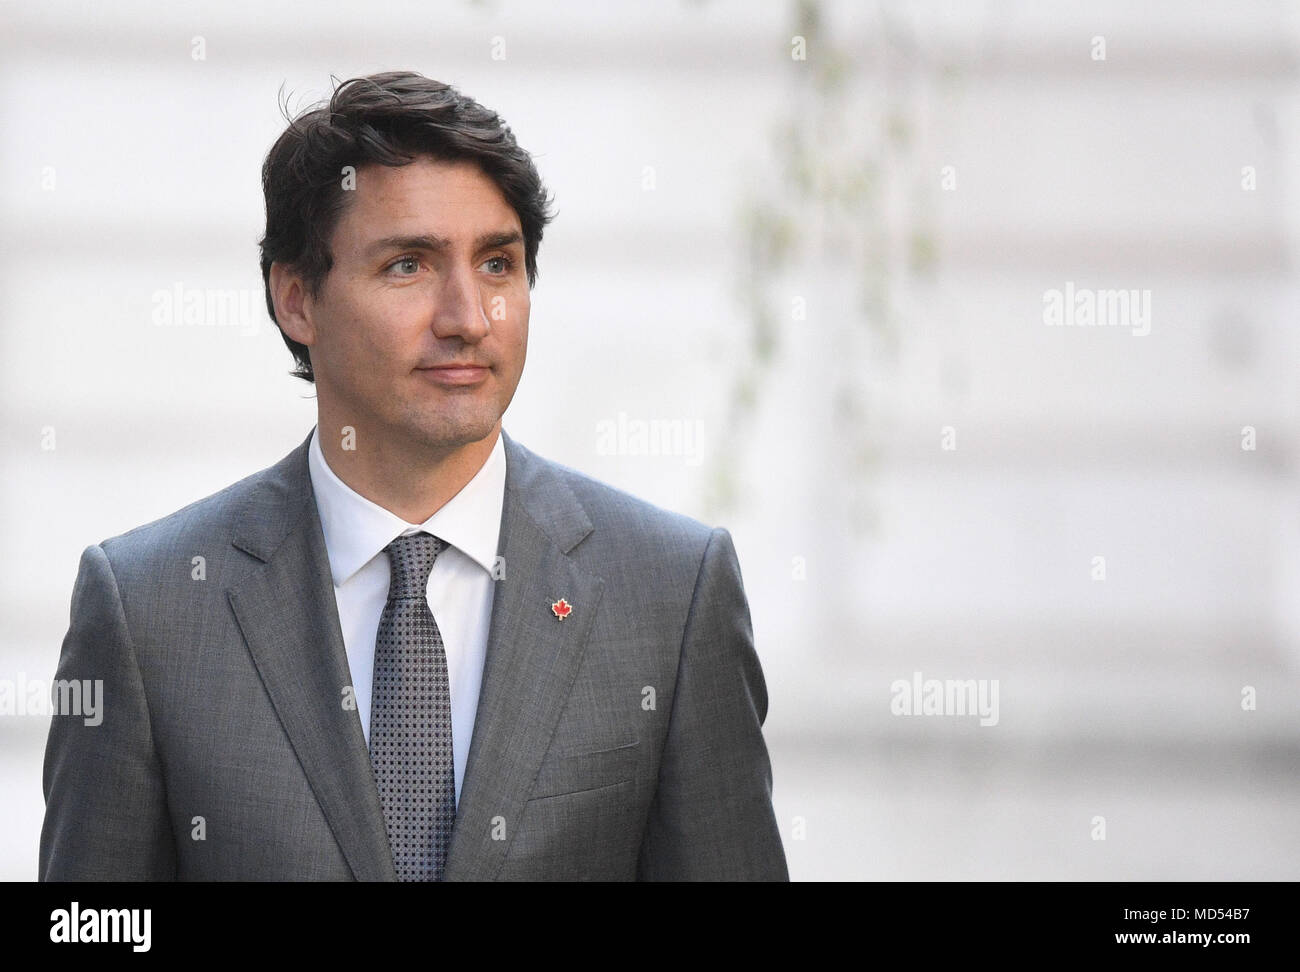 Canadian Prime Minister Justin Trudeau, as he arrives in Downing Street, London, ahead of bilateral talks with Prime Minister Theresa May during the Commonwealth Heads of Government Meeting. Stock Photo